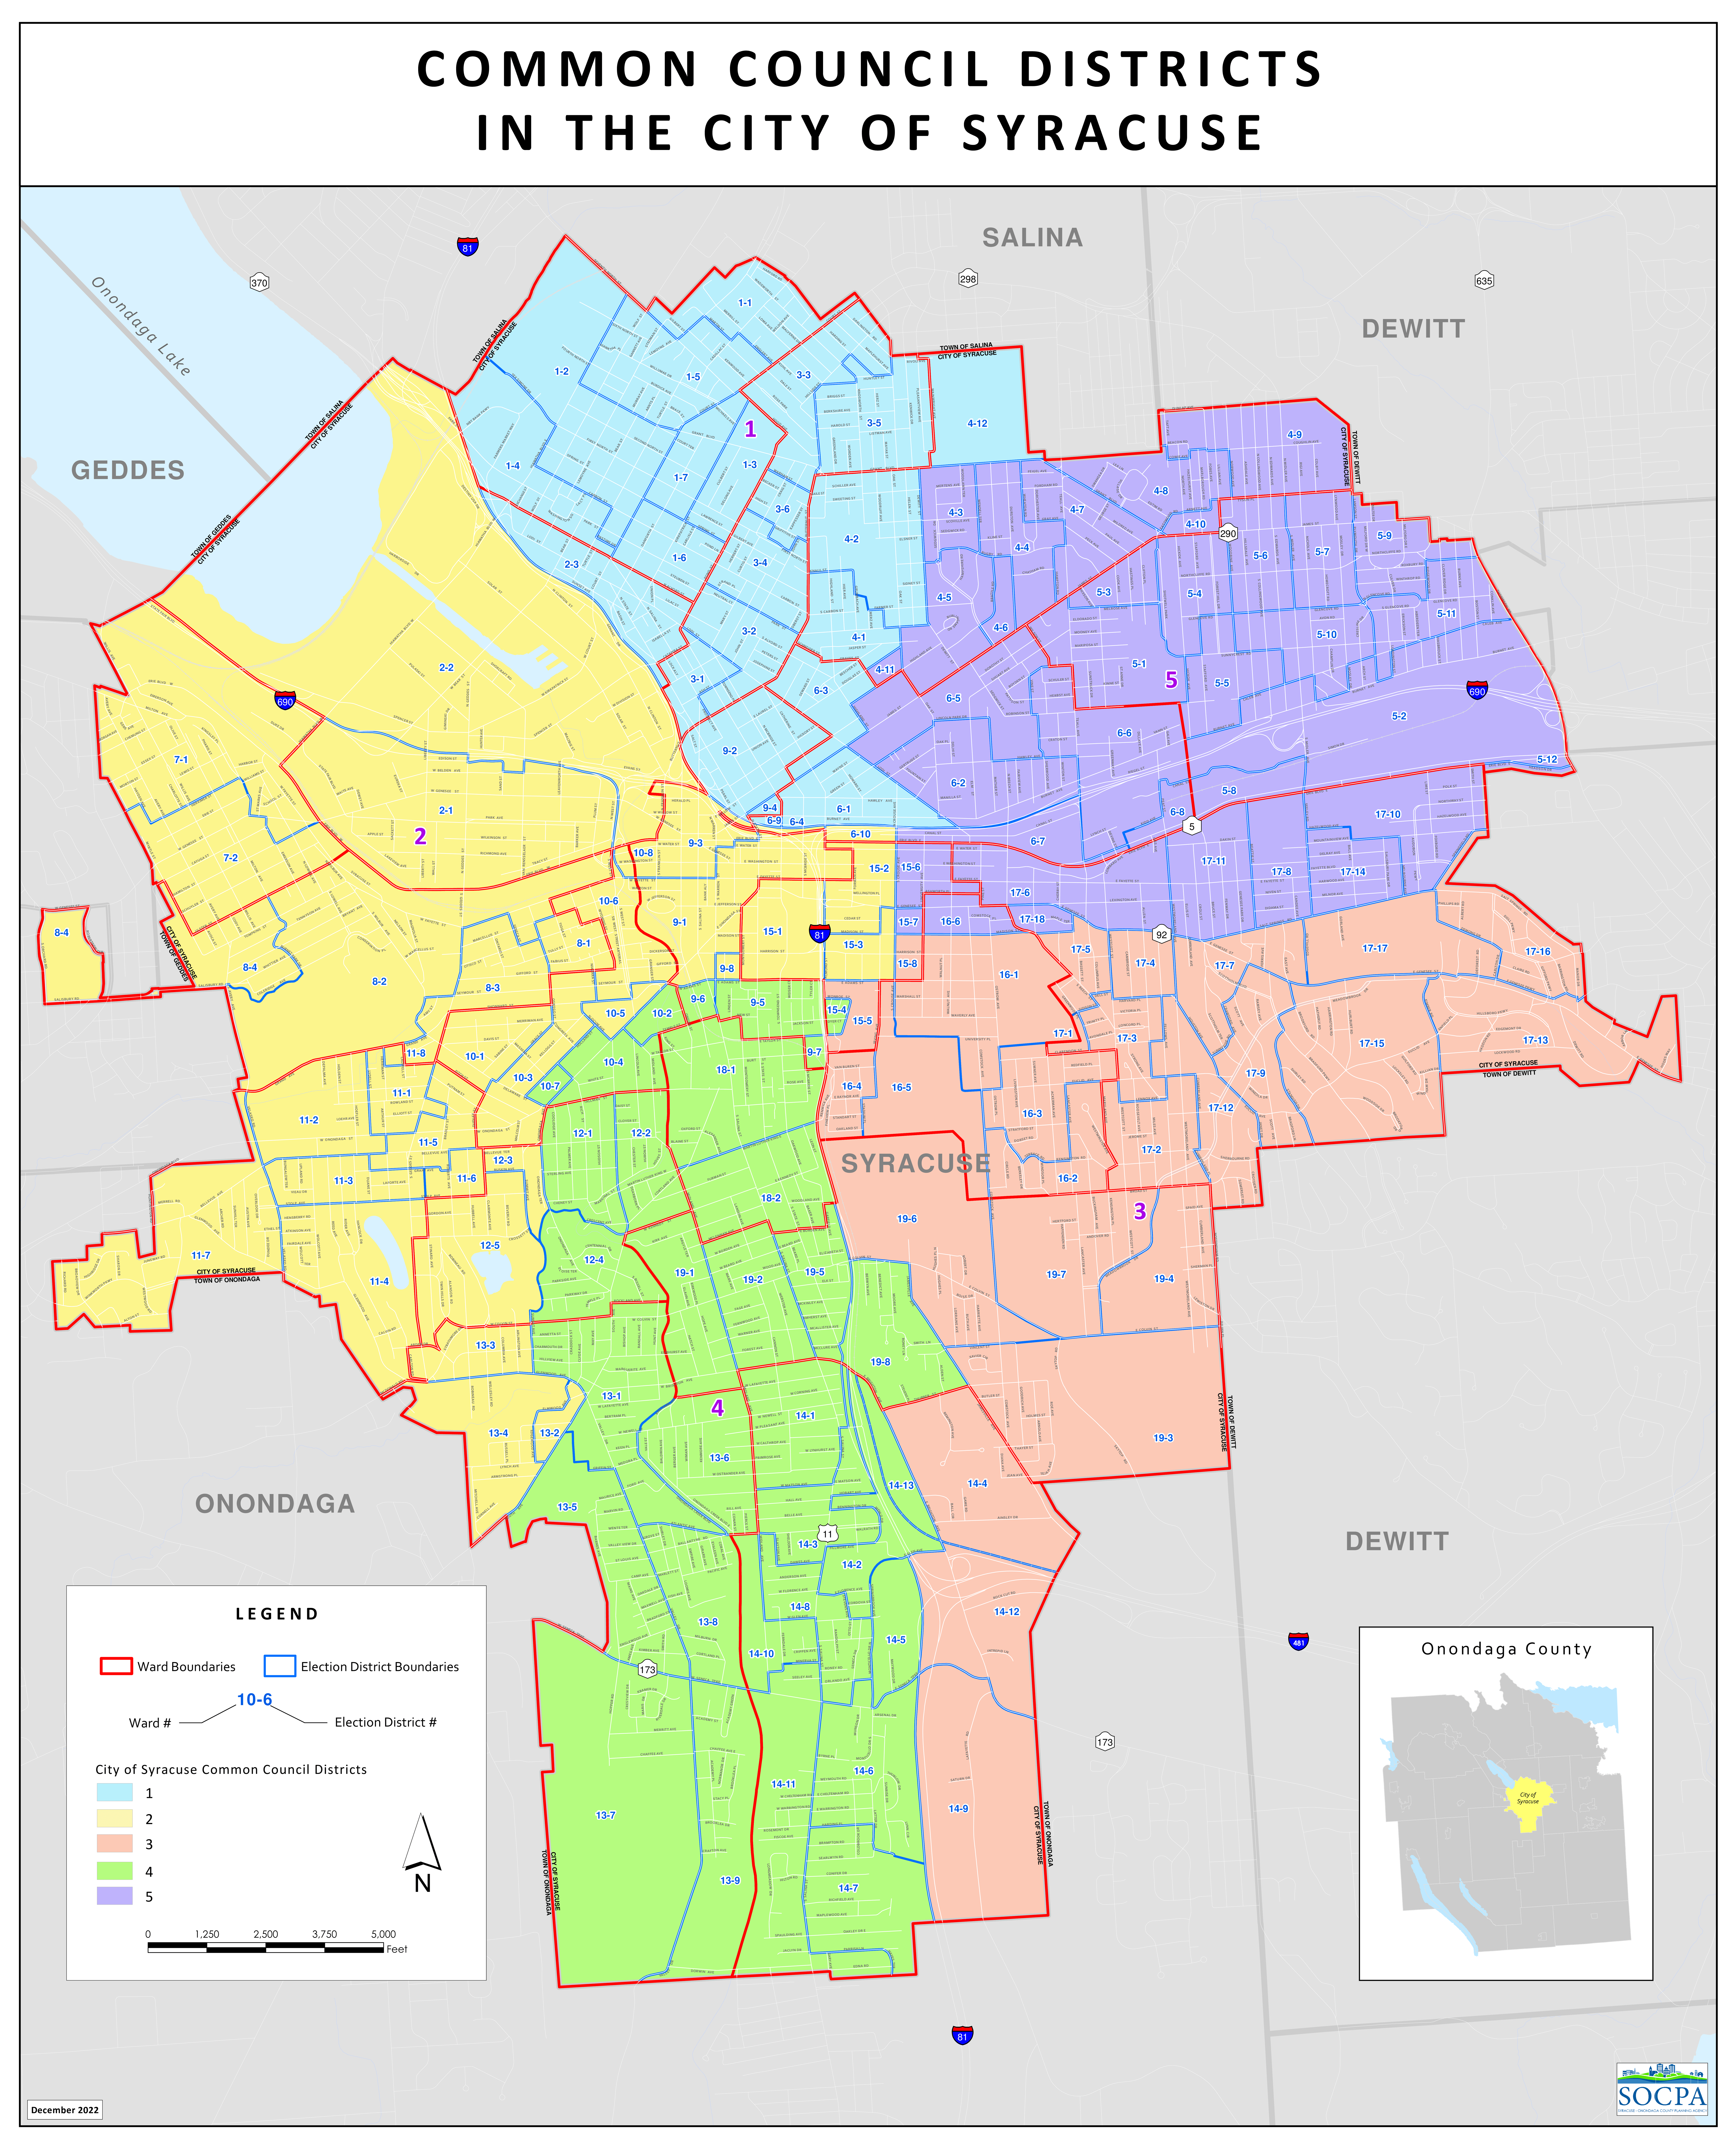 City-of-Syracuse-Common-Council-Districts.png